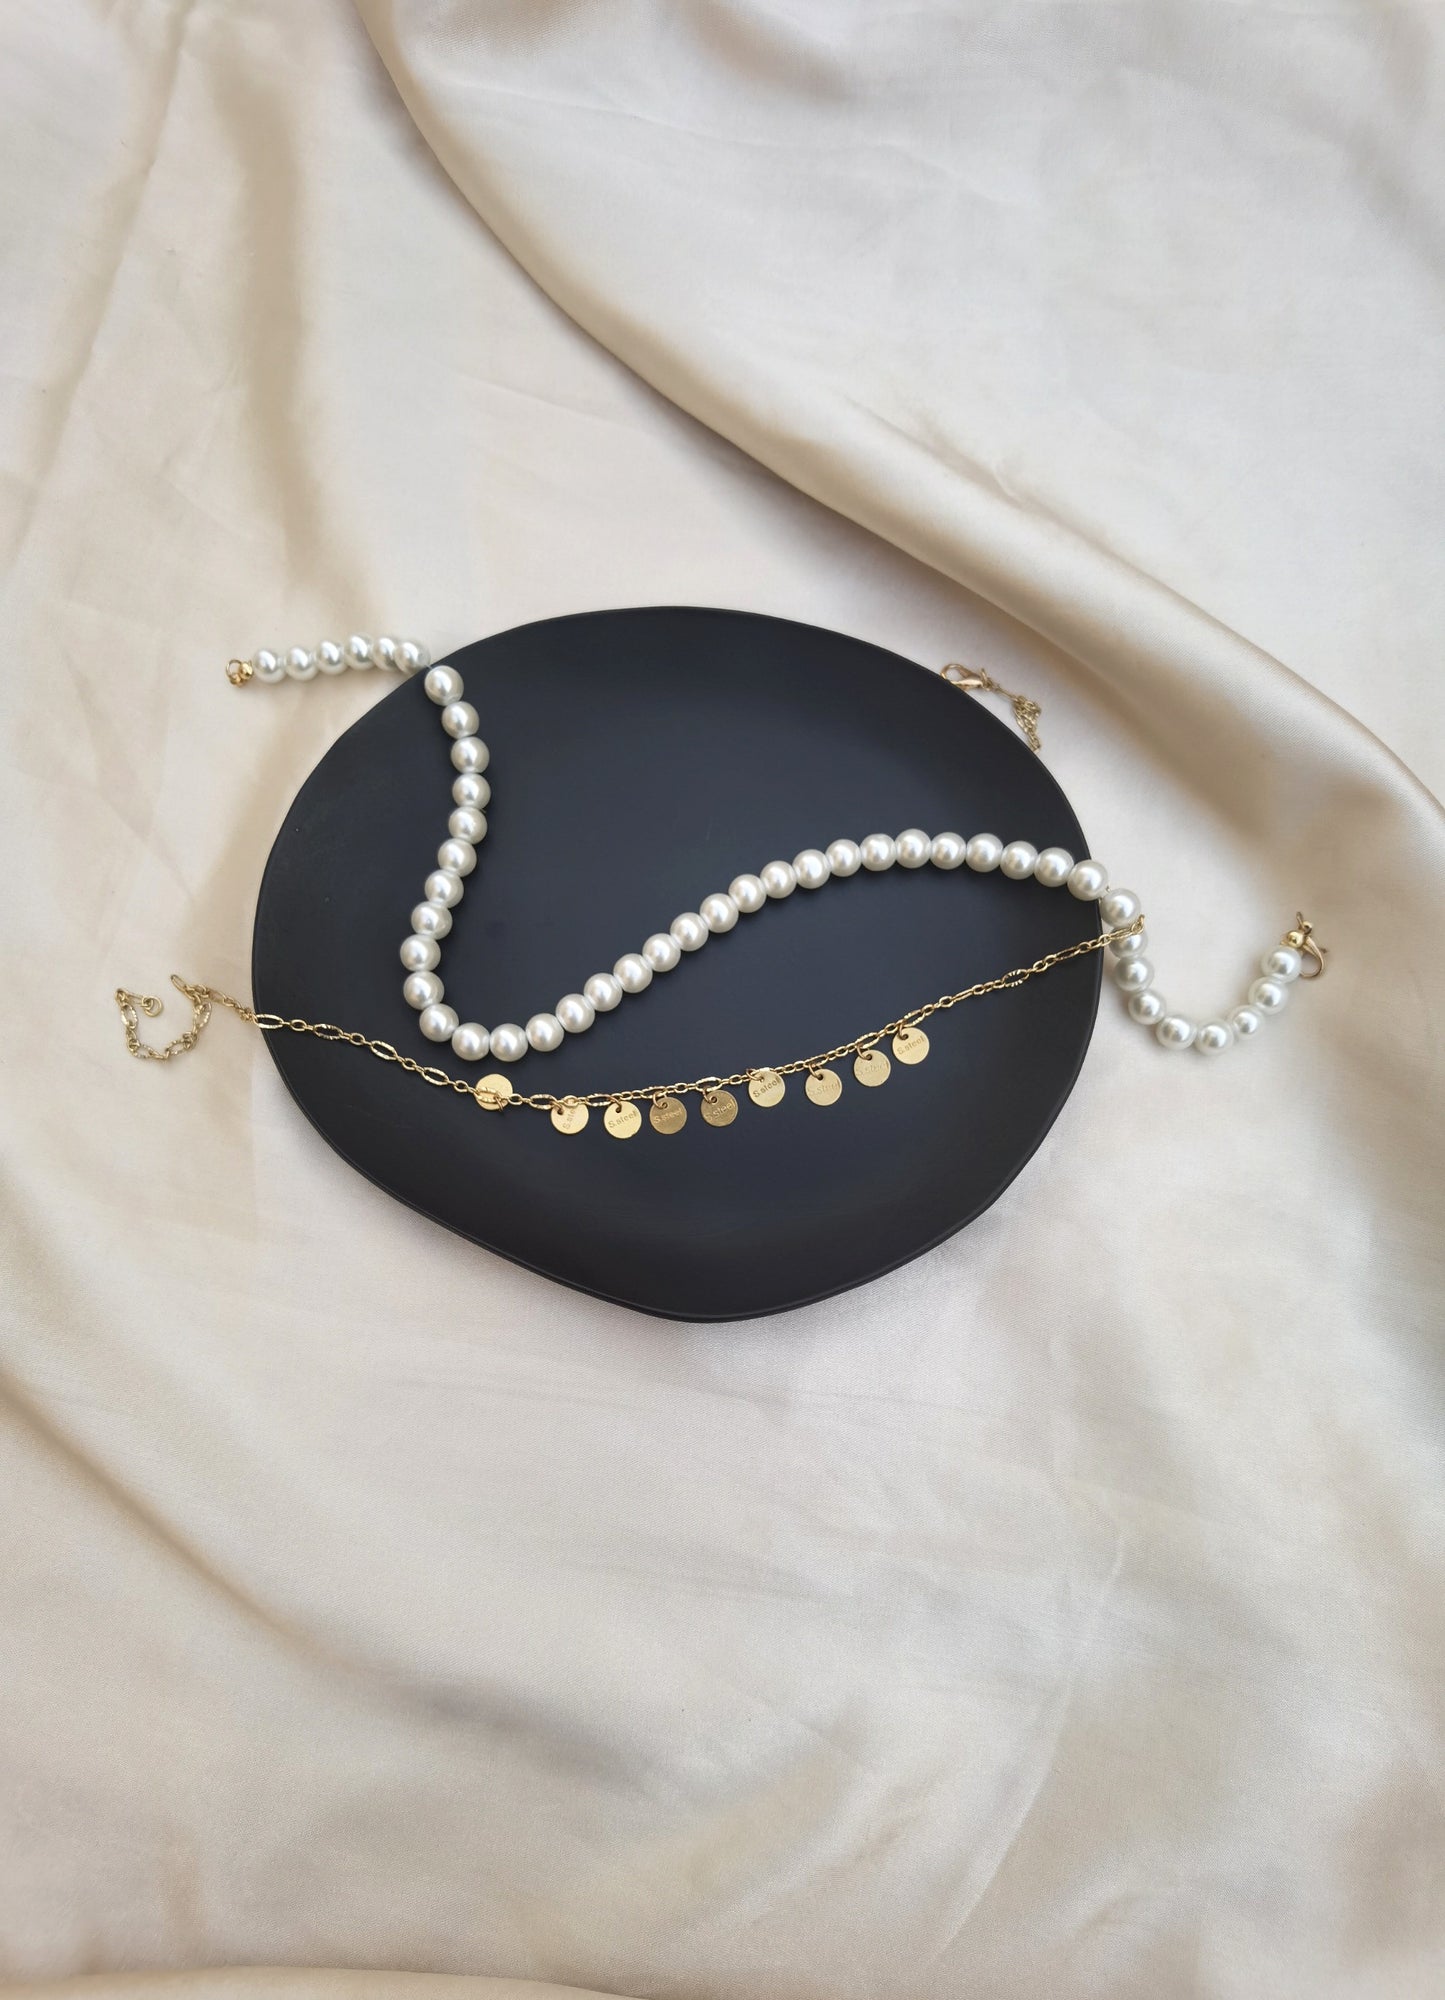 Pearl necklace and short stainless steel chain set